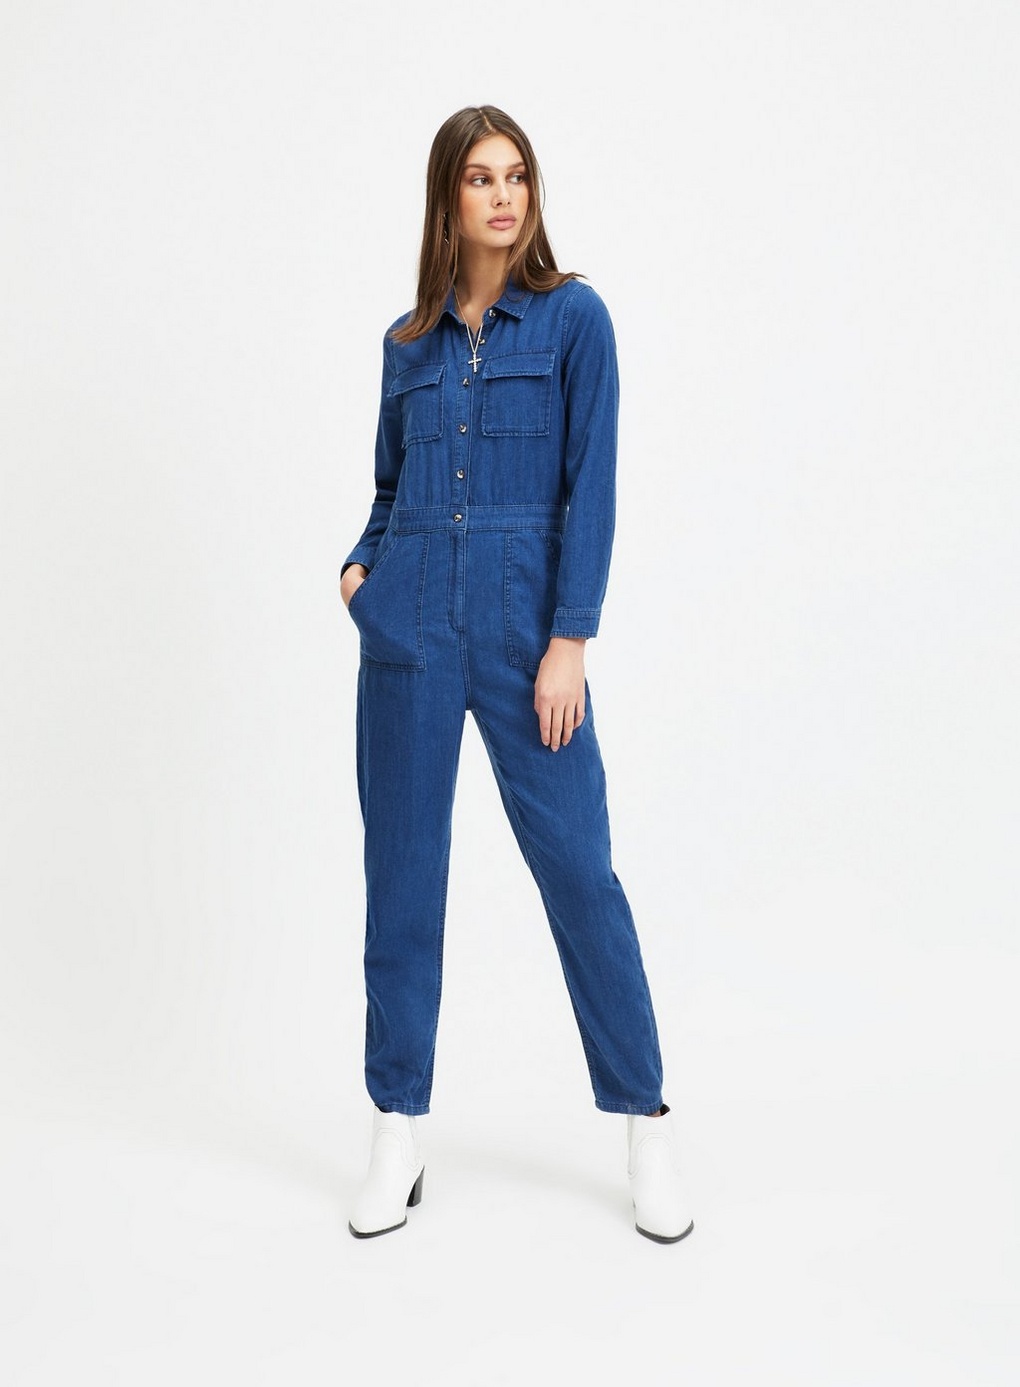 How to style a boiler suit without going full Mario Brothers